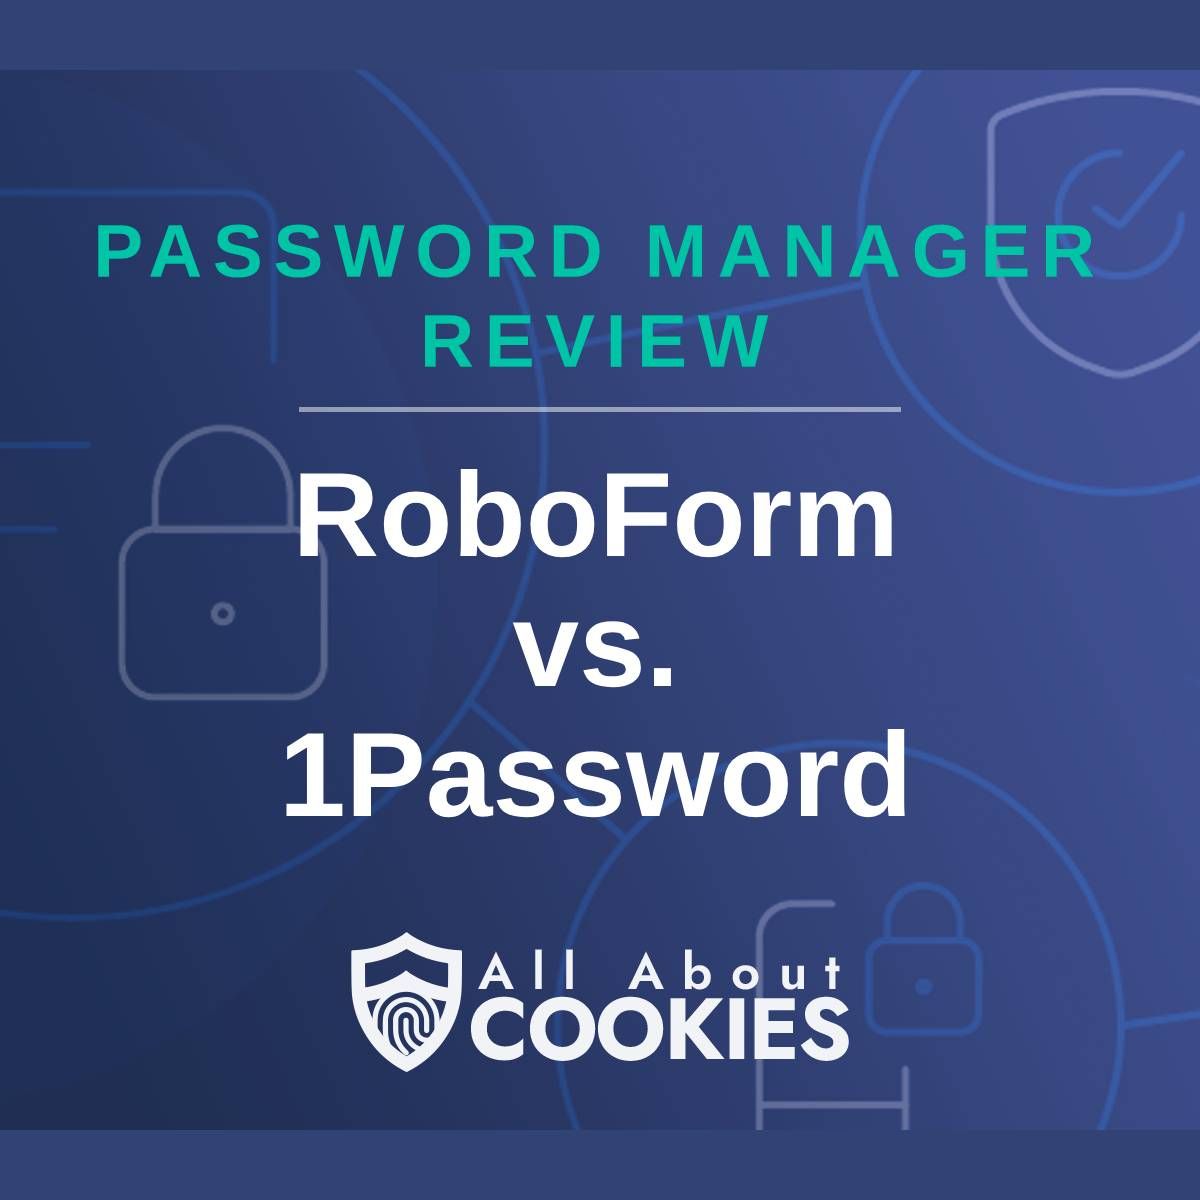 A blue background with images of locks and shields with the text &quot;Password Manager Review RoboForm vs. 1Password&quot; and the All About Cookies logo. 